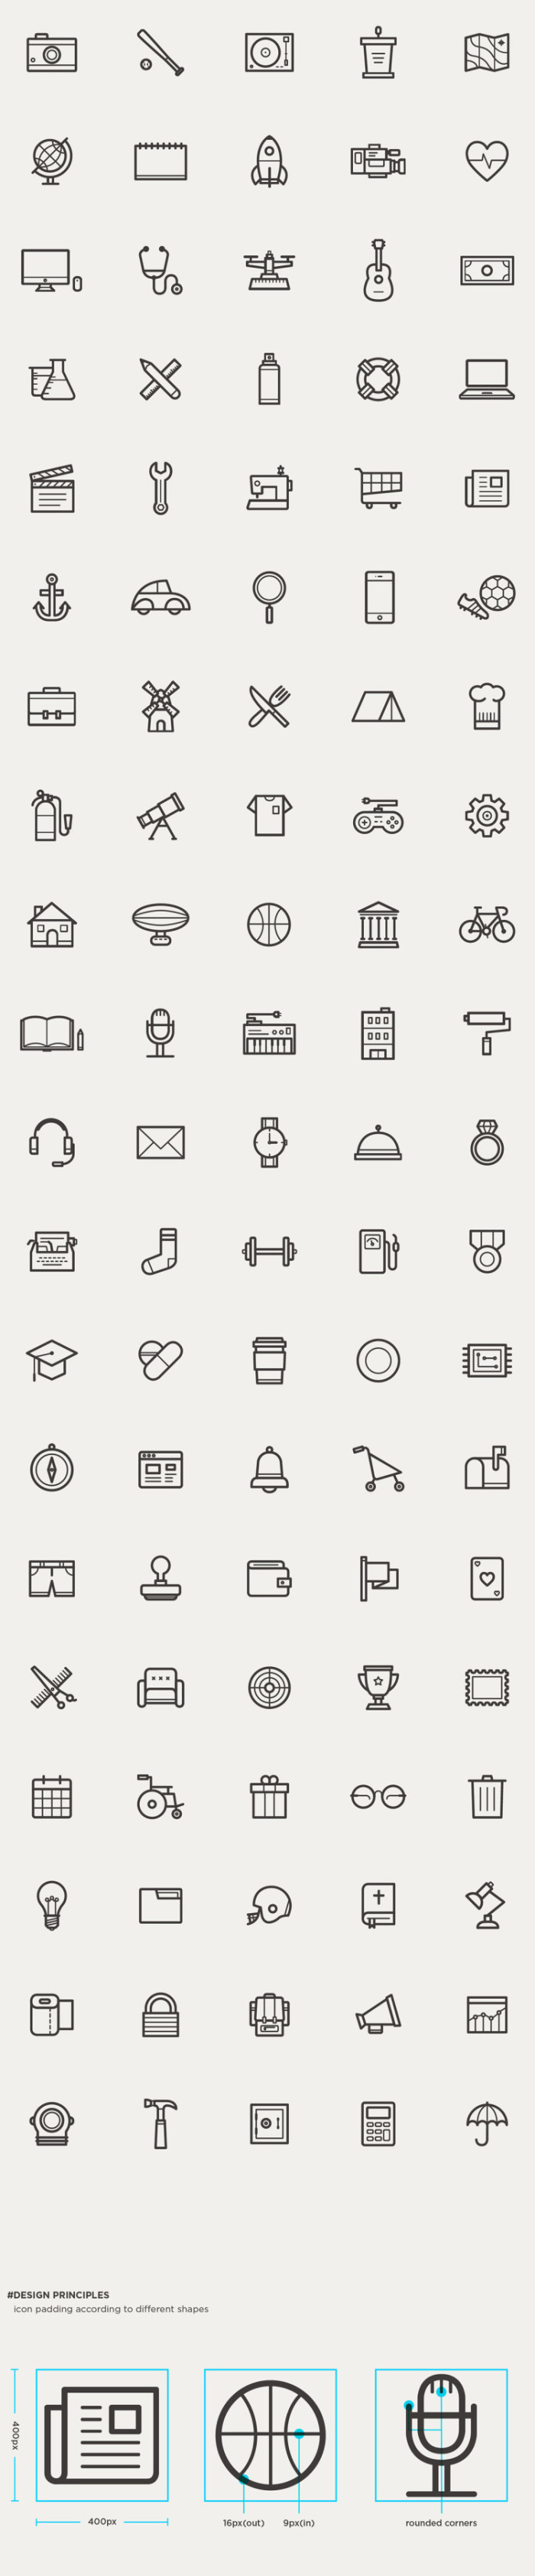 100-free-outline-icons